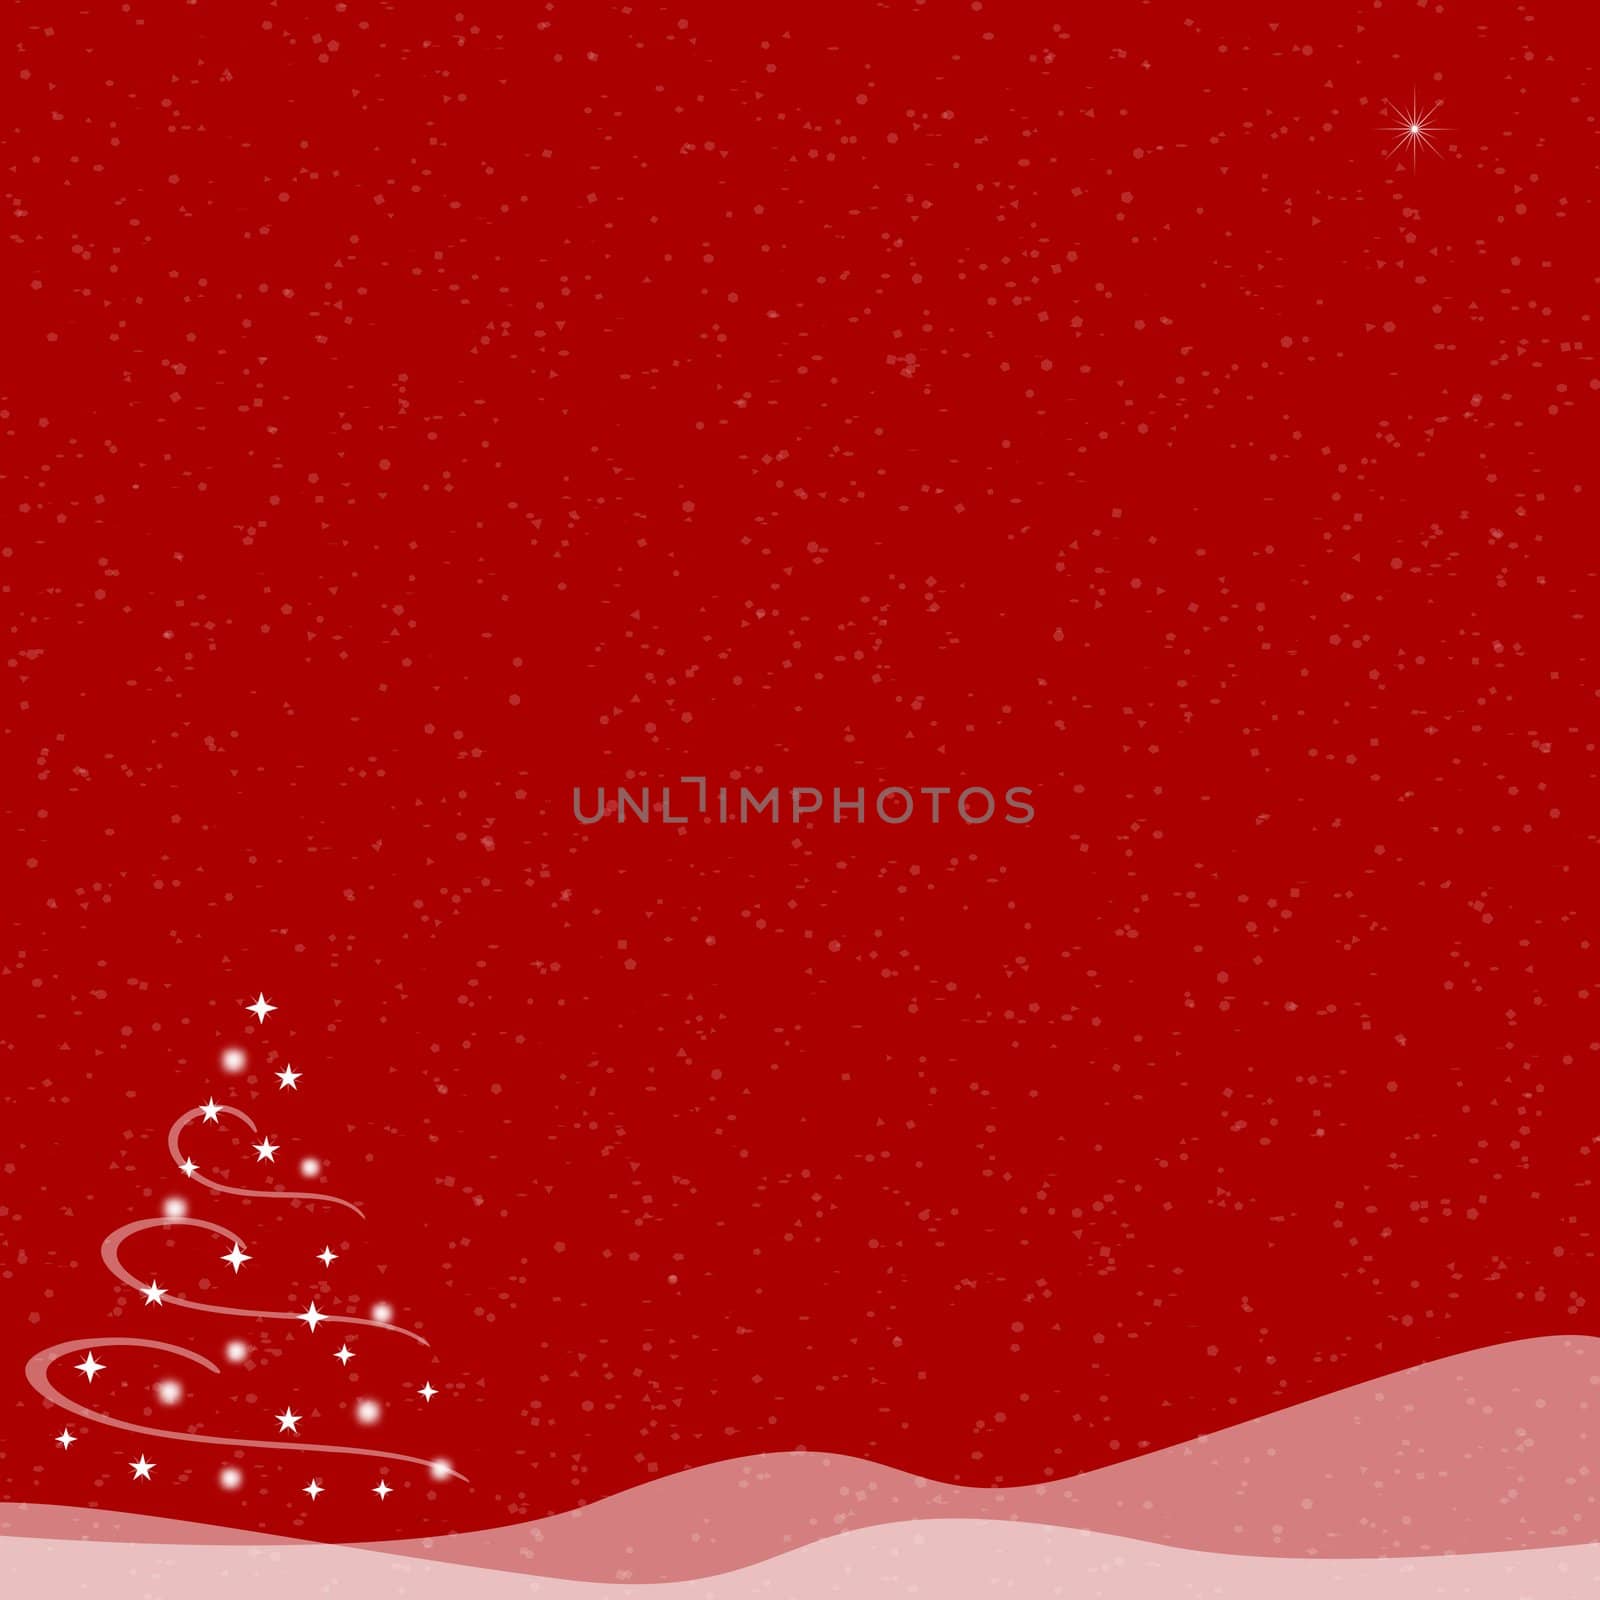 Abstract illustration of of a Christmas tree made from stars and surrounded by swirls of white on top of snow hills created with transparency.  A single star shines in the sky as snow falls on a red background.  Copy space.